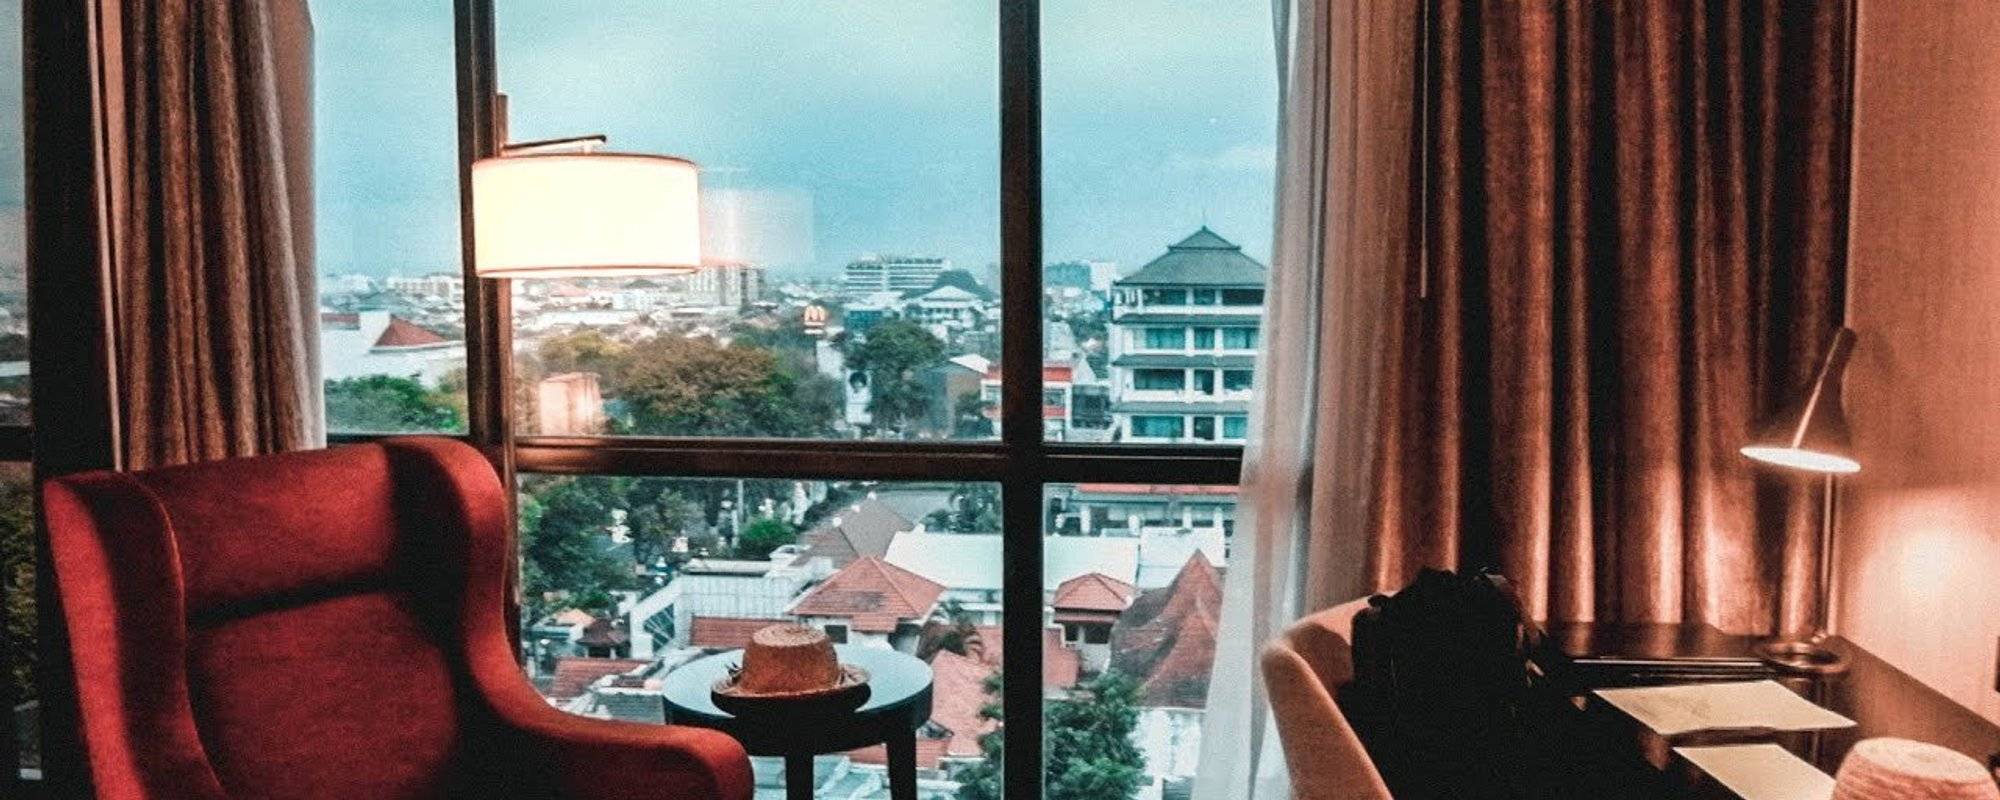 Most fancy hotel with a view of YOGYAKARTA!